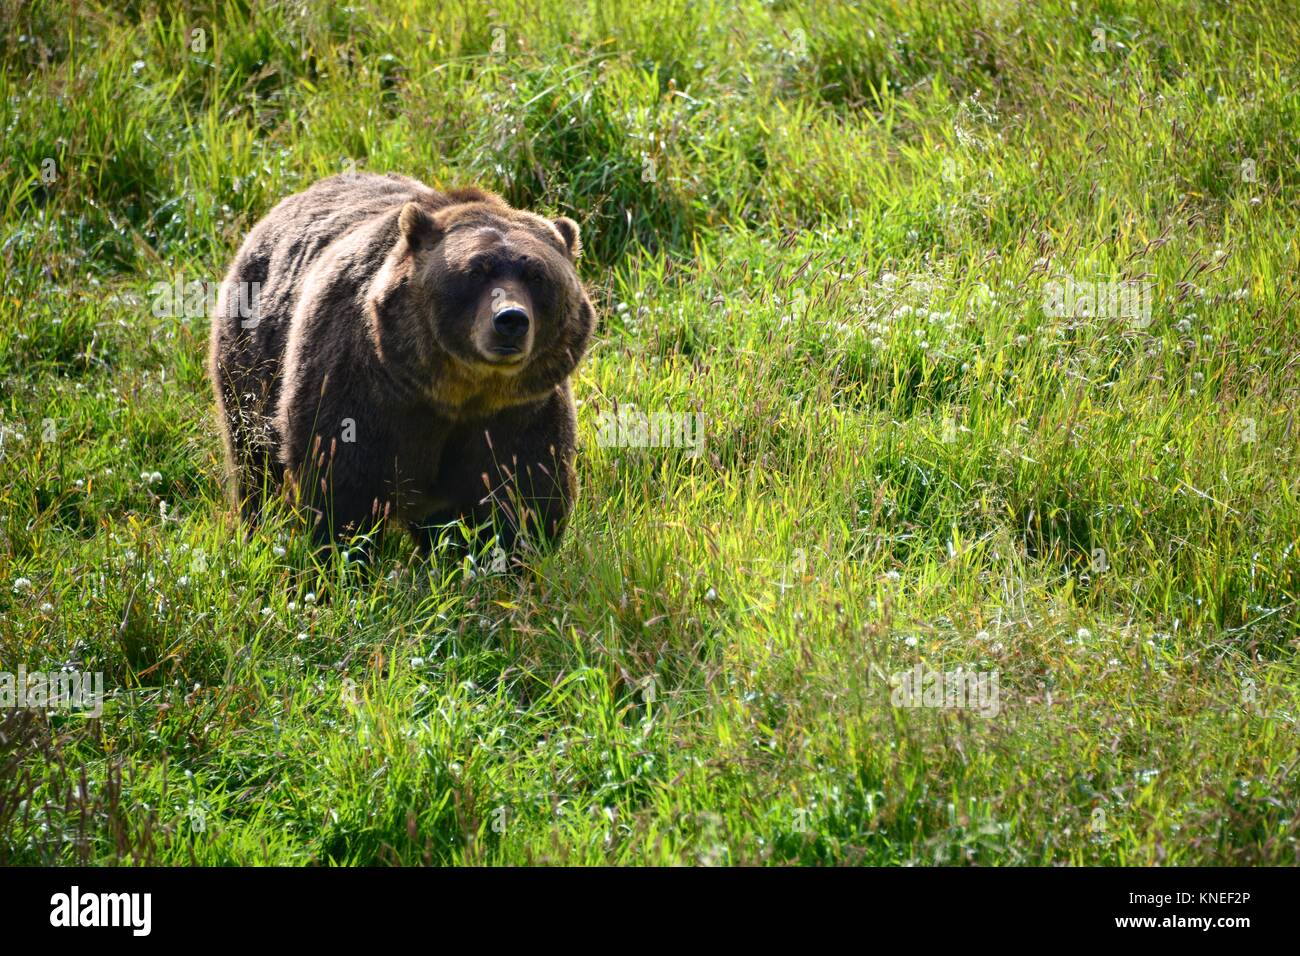 Grizzly bear in wilderness, Anchorage, Alaska, United States Stock Photo